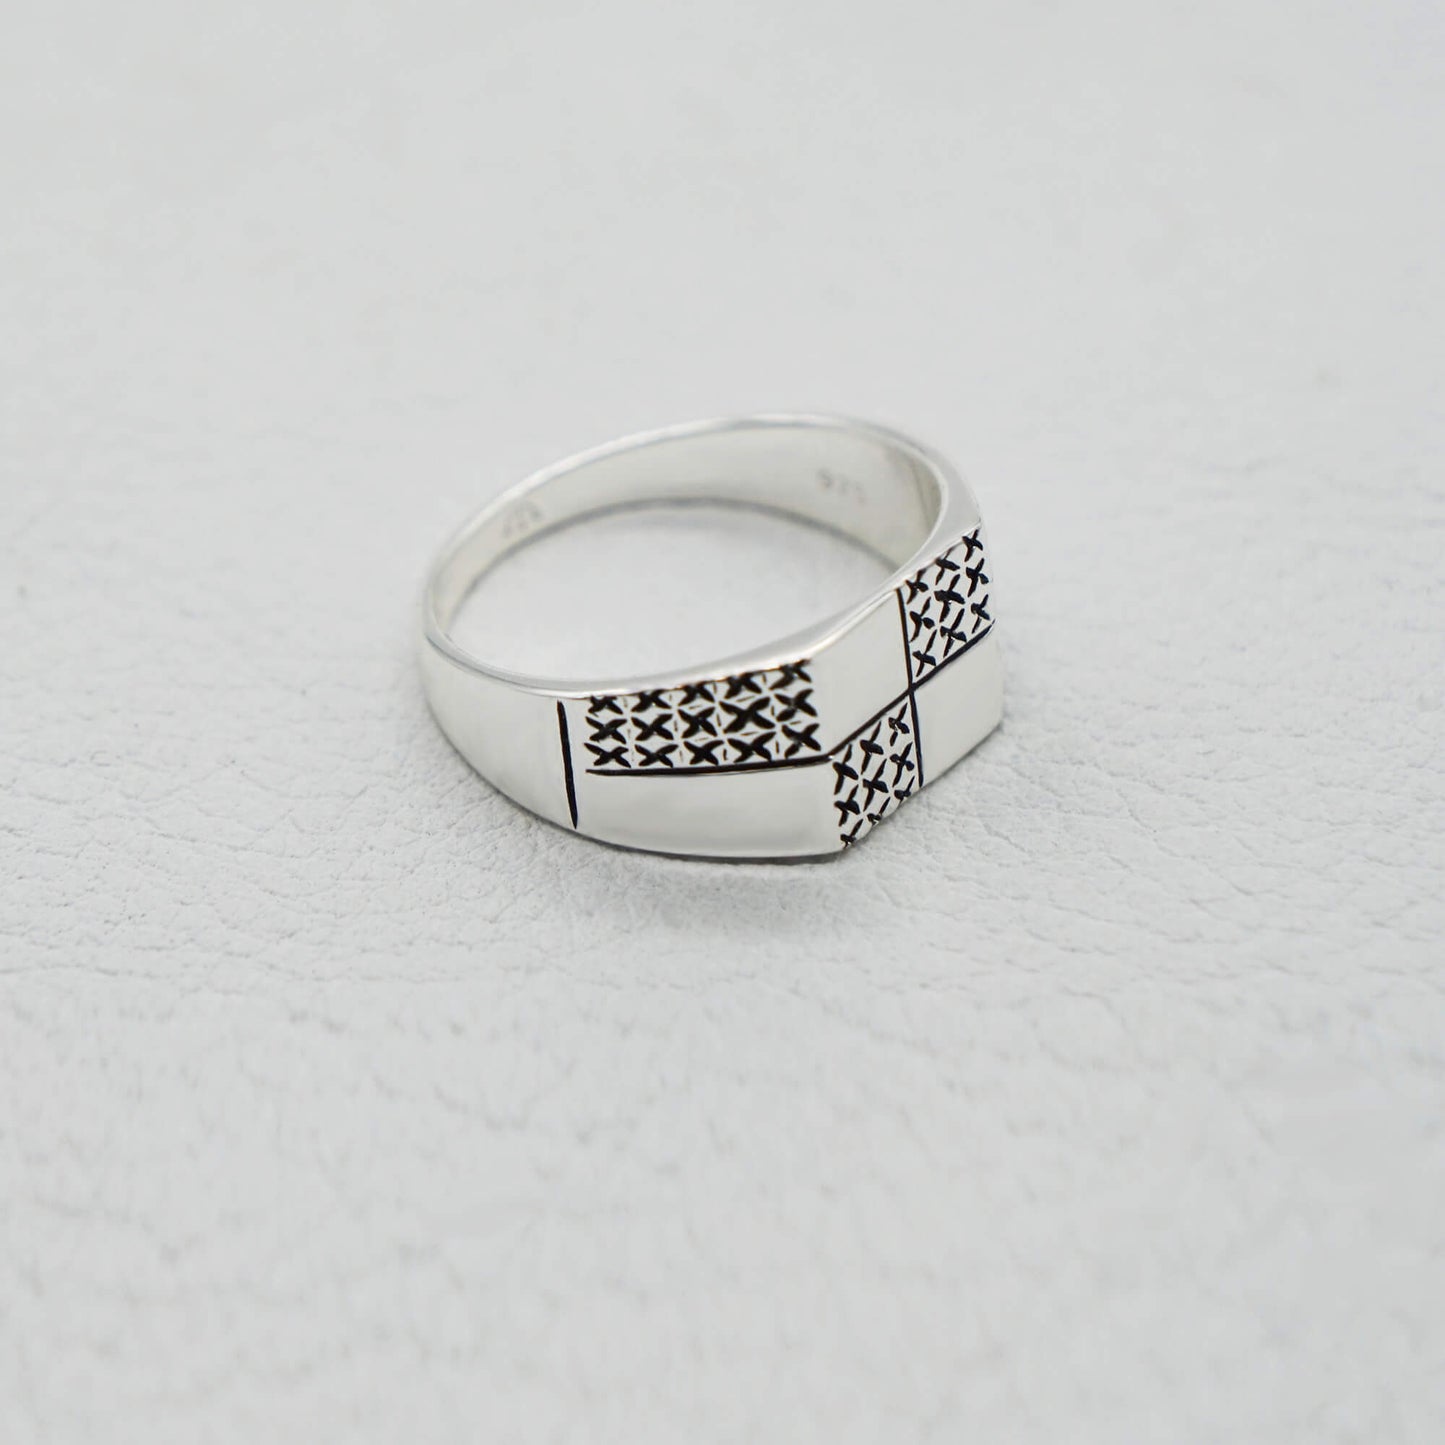 PAWNSHOP SIGNATURE CHECKERBOARD SIGNET RING